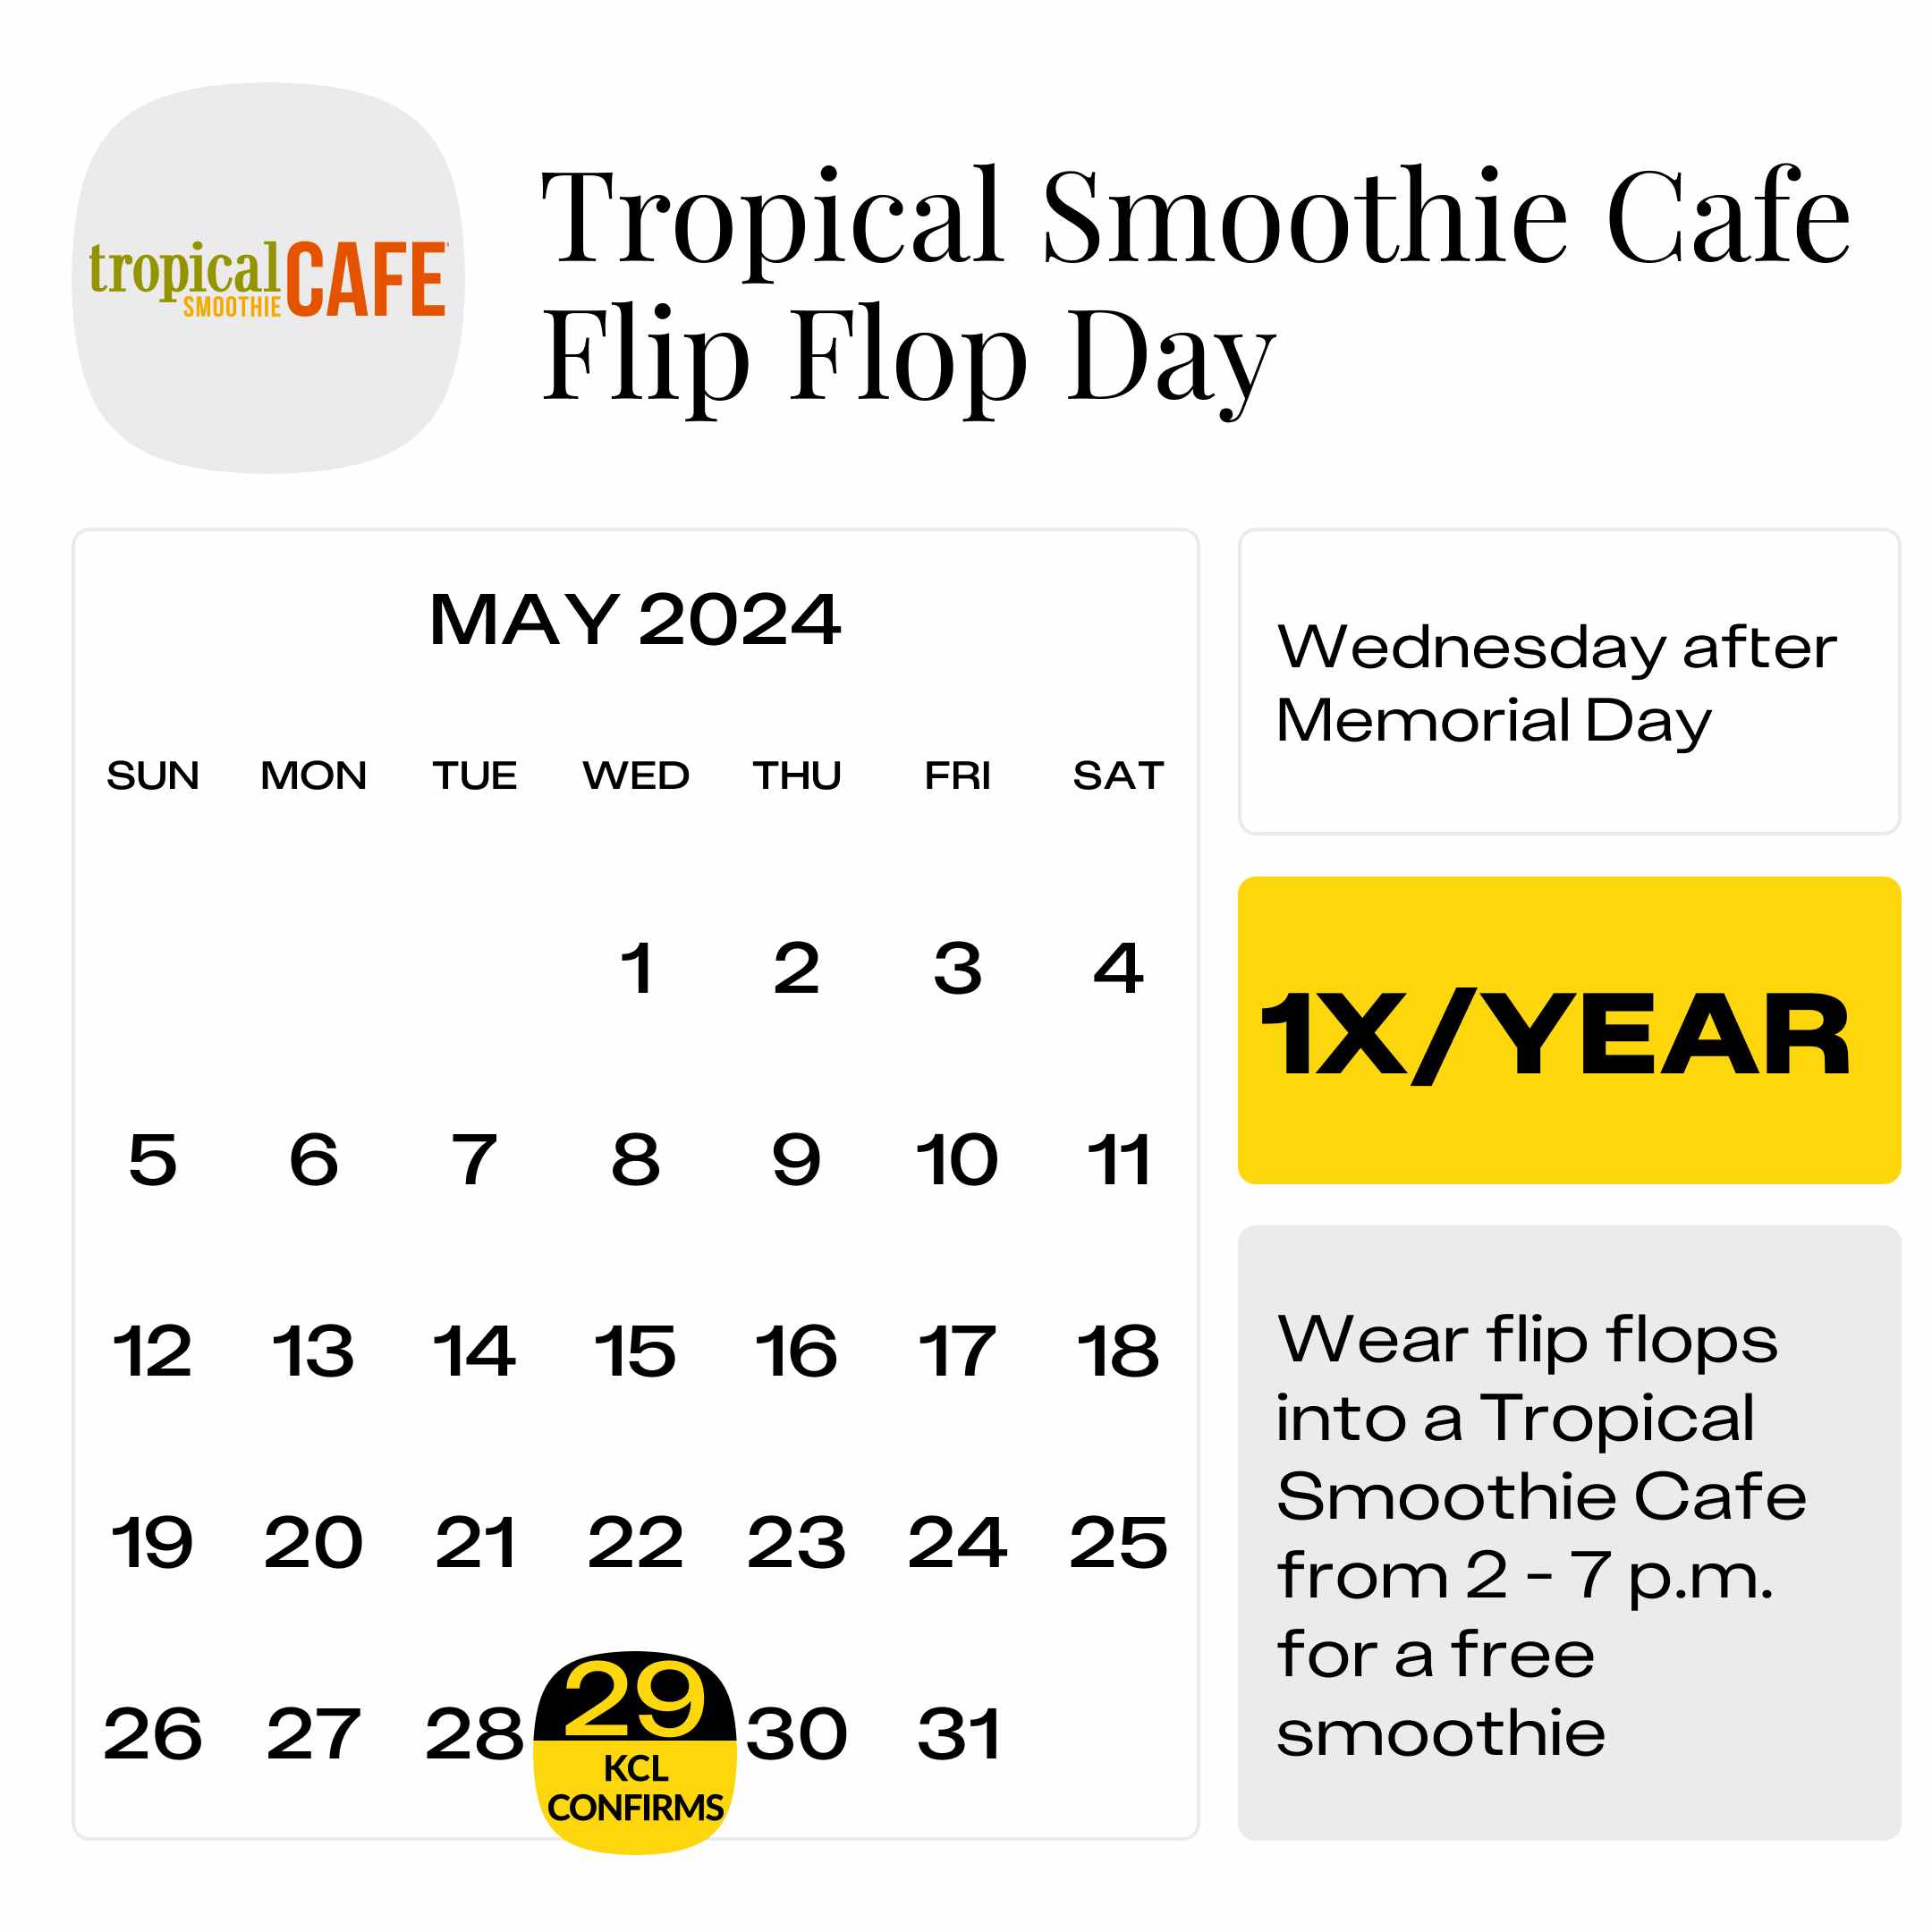 Tropical-Smoothie-Cafe-Flip-Flop-Day-2024